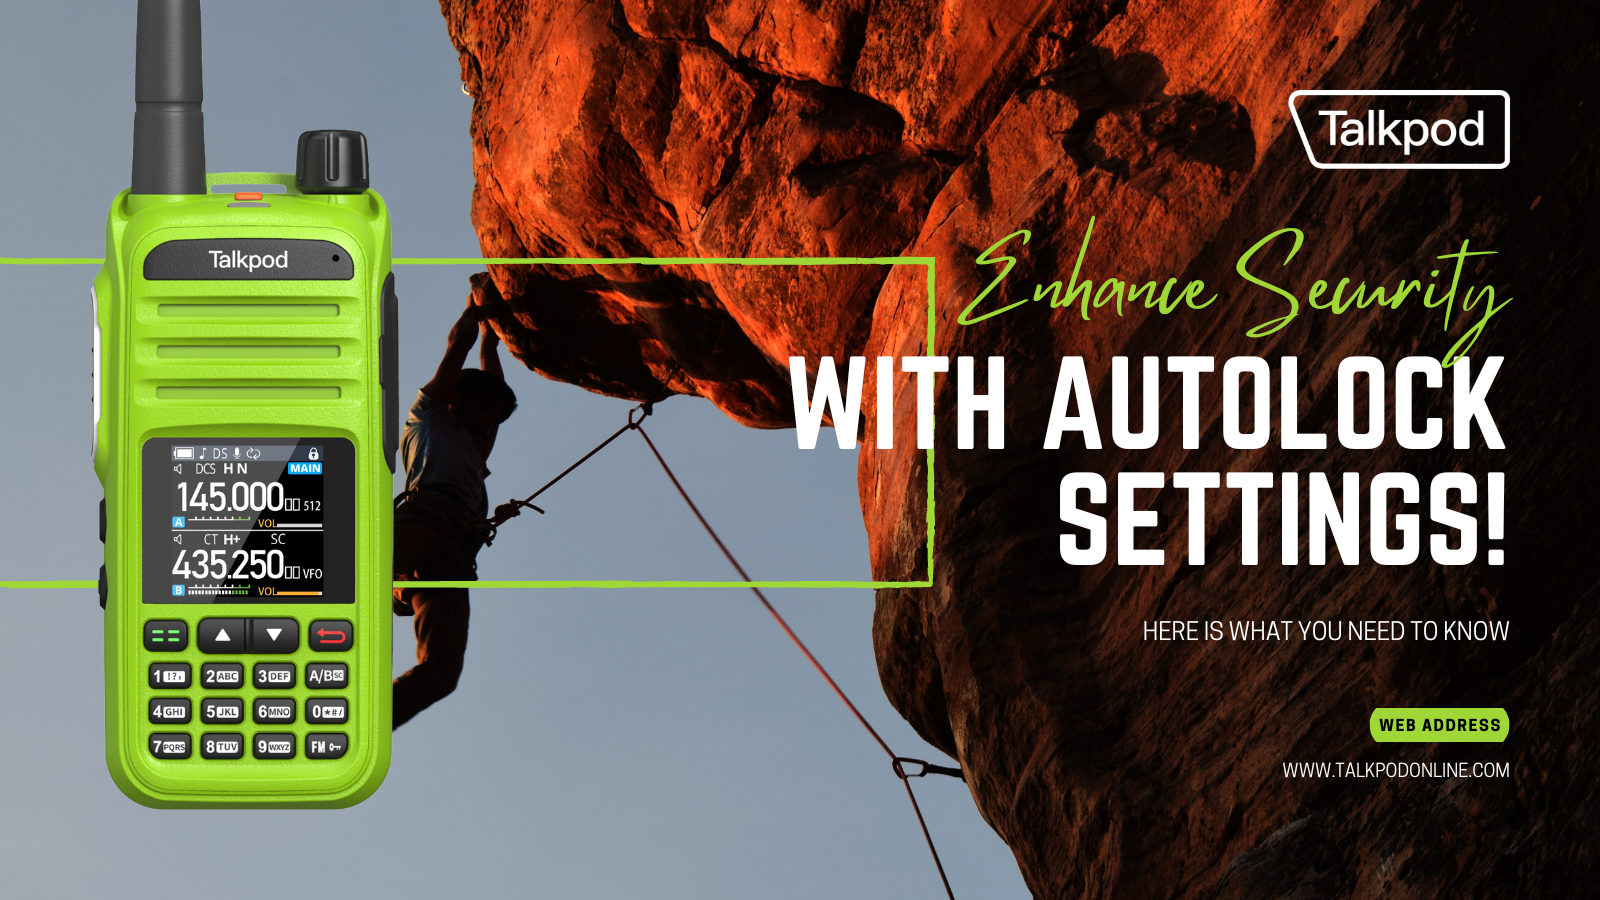 Enhance Security with AUTOLOCK Settings!